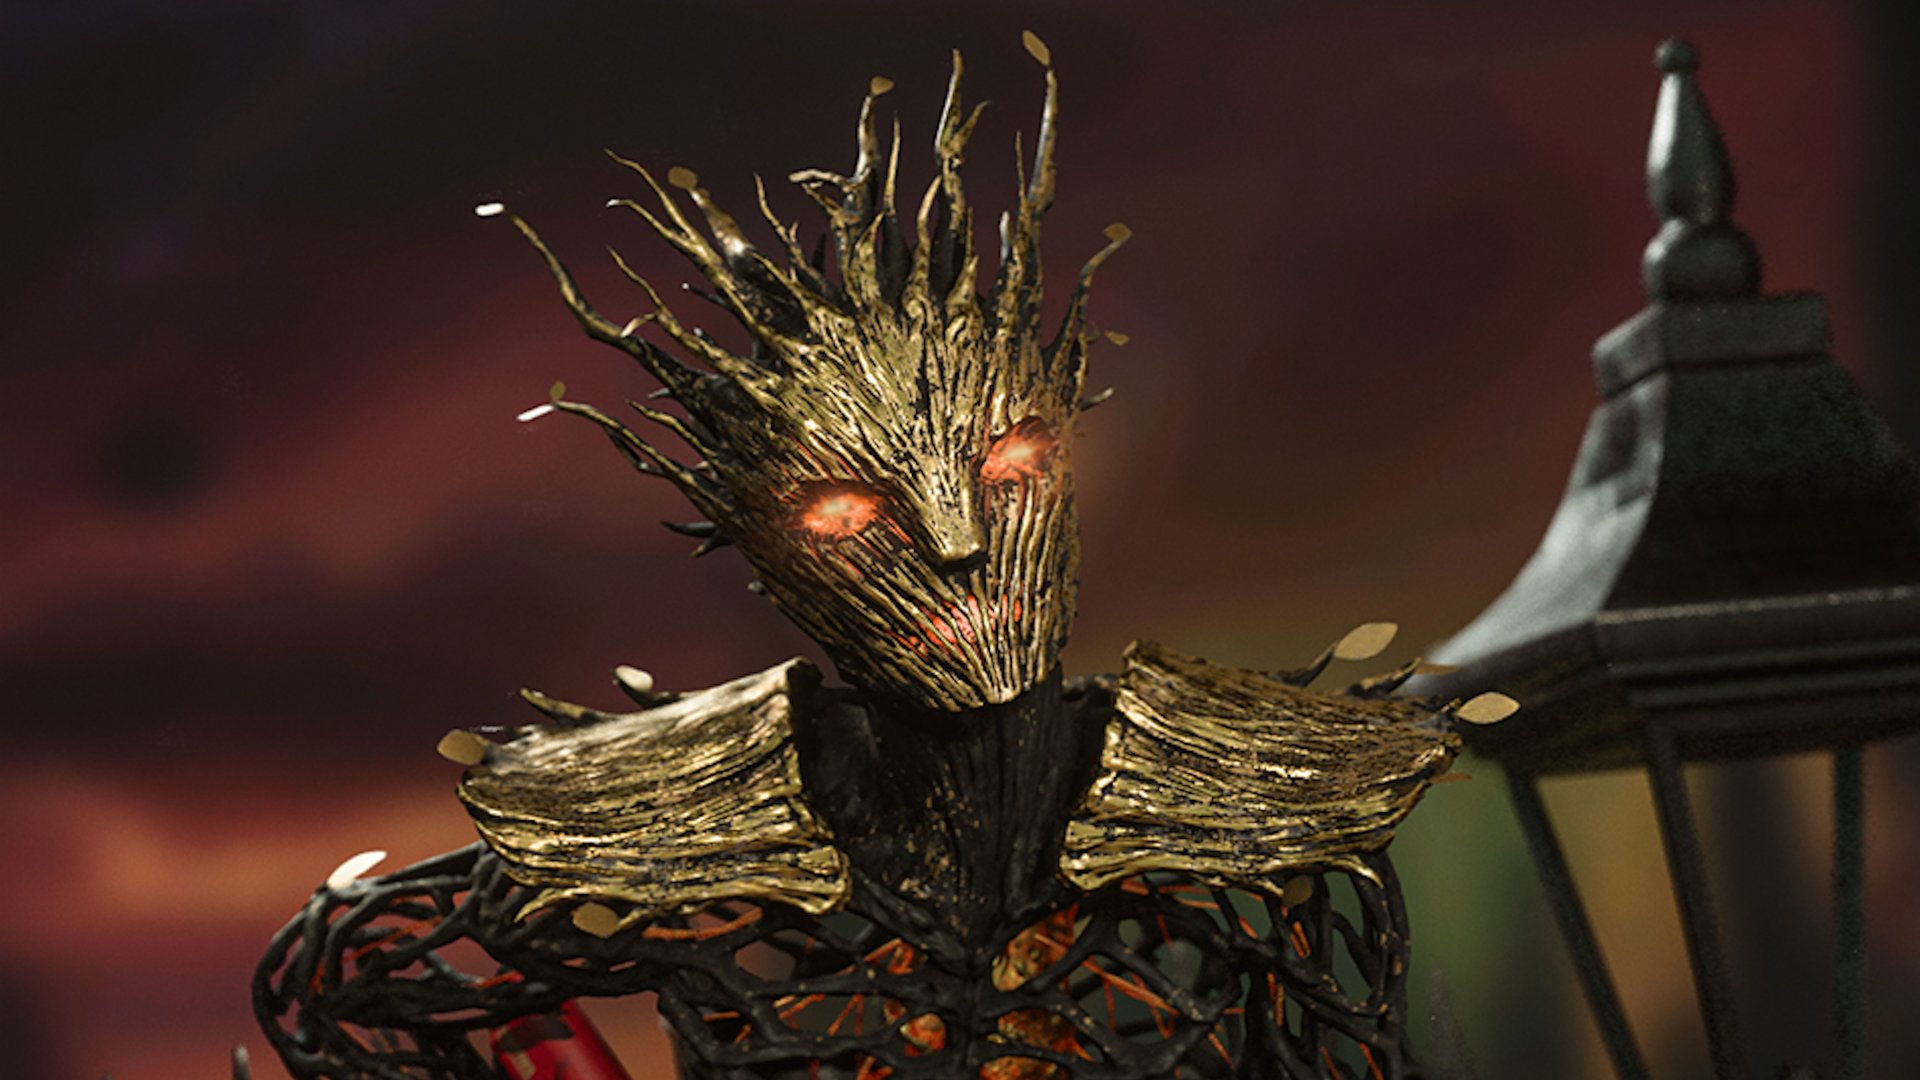 Modern Warfare 3’s loathed ‘Groot’ skin is getting yanked and nerfed following widespread player backlash